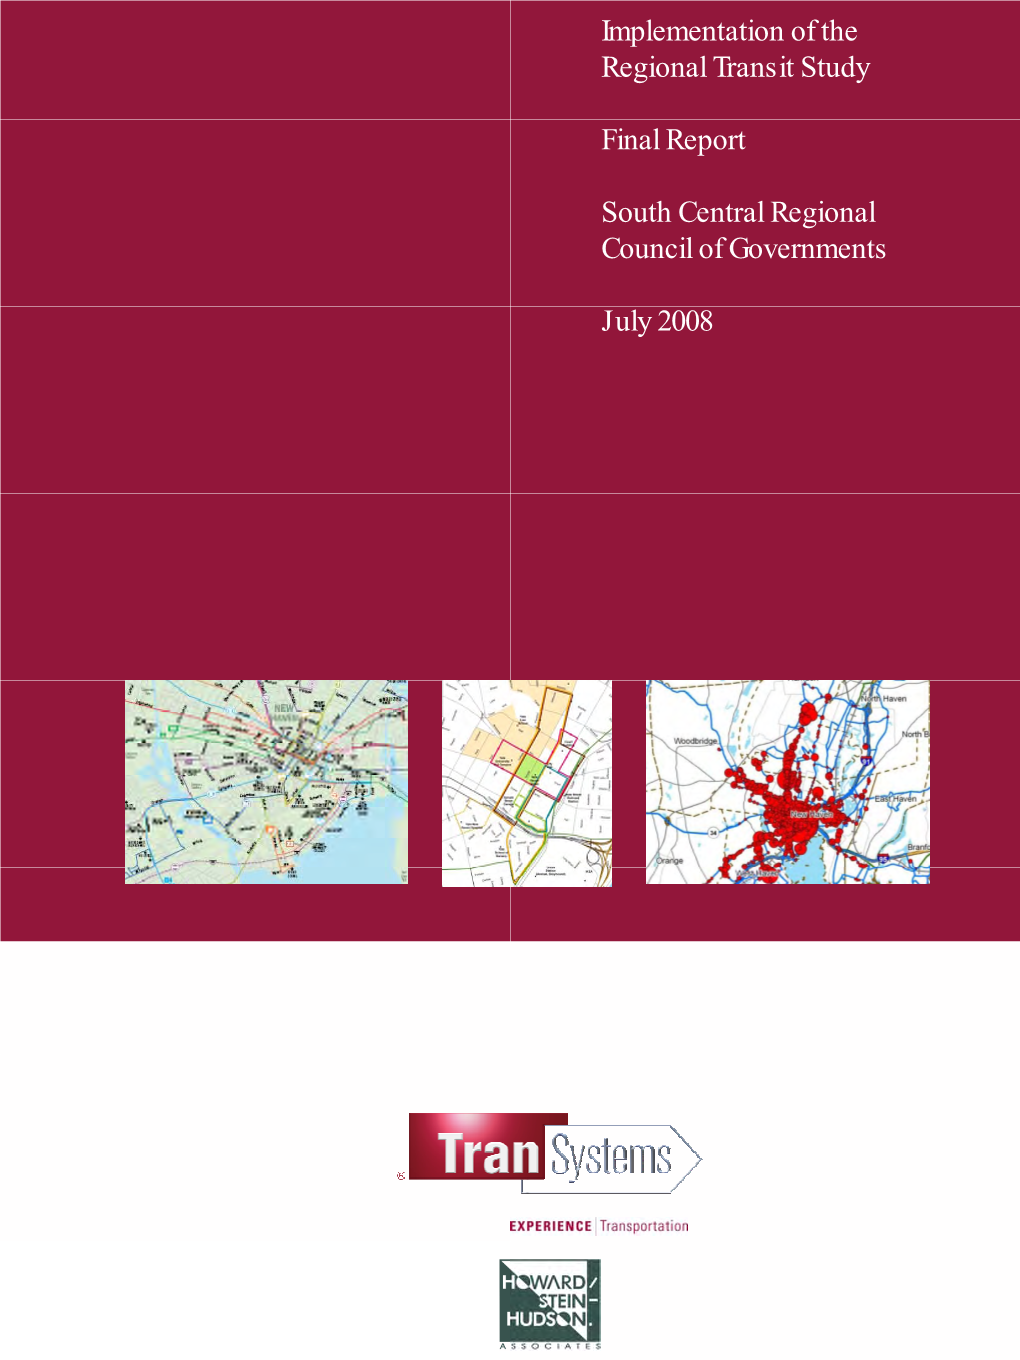 Implementation of the Regional Transit Study